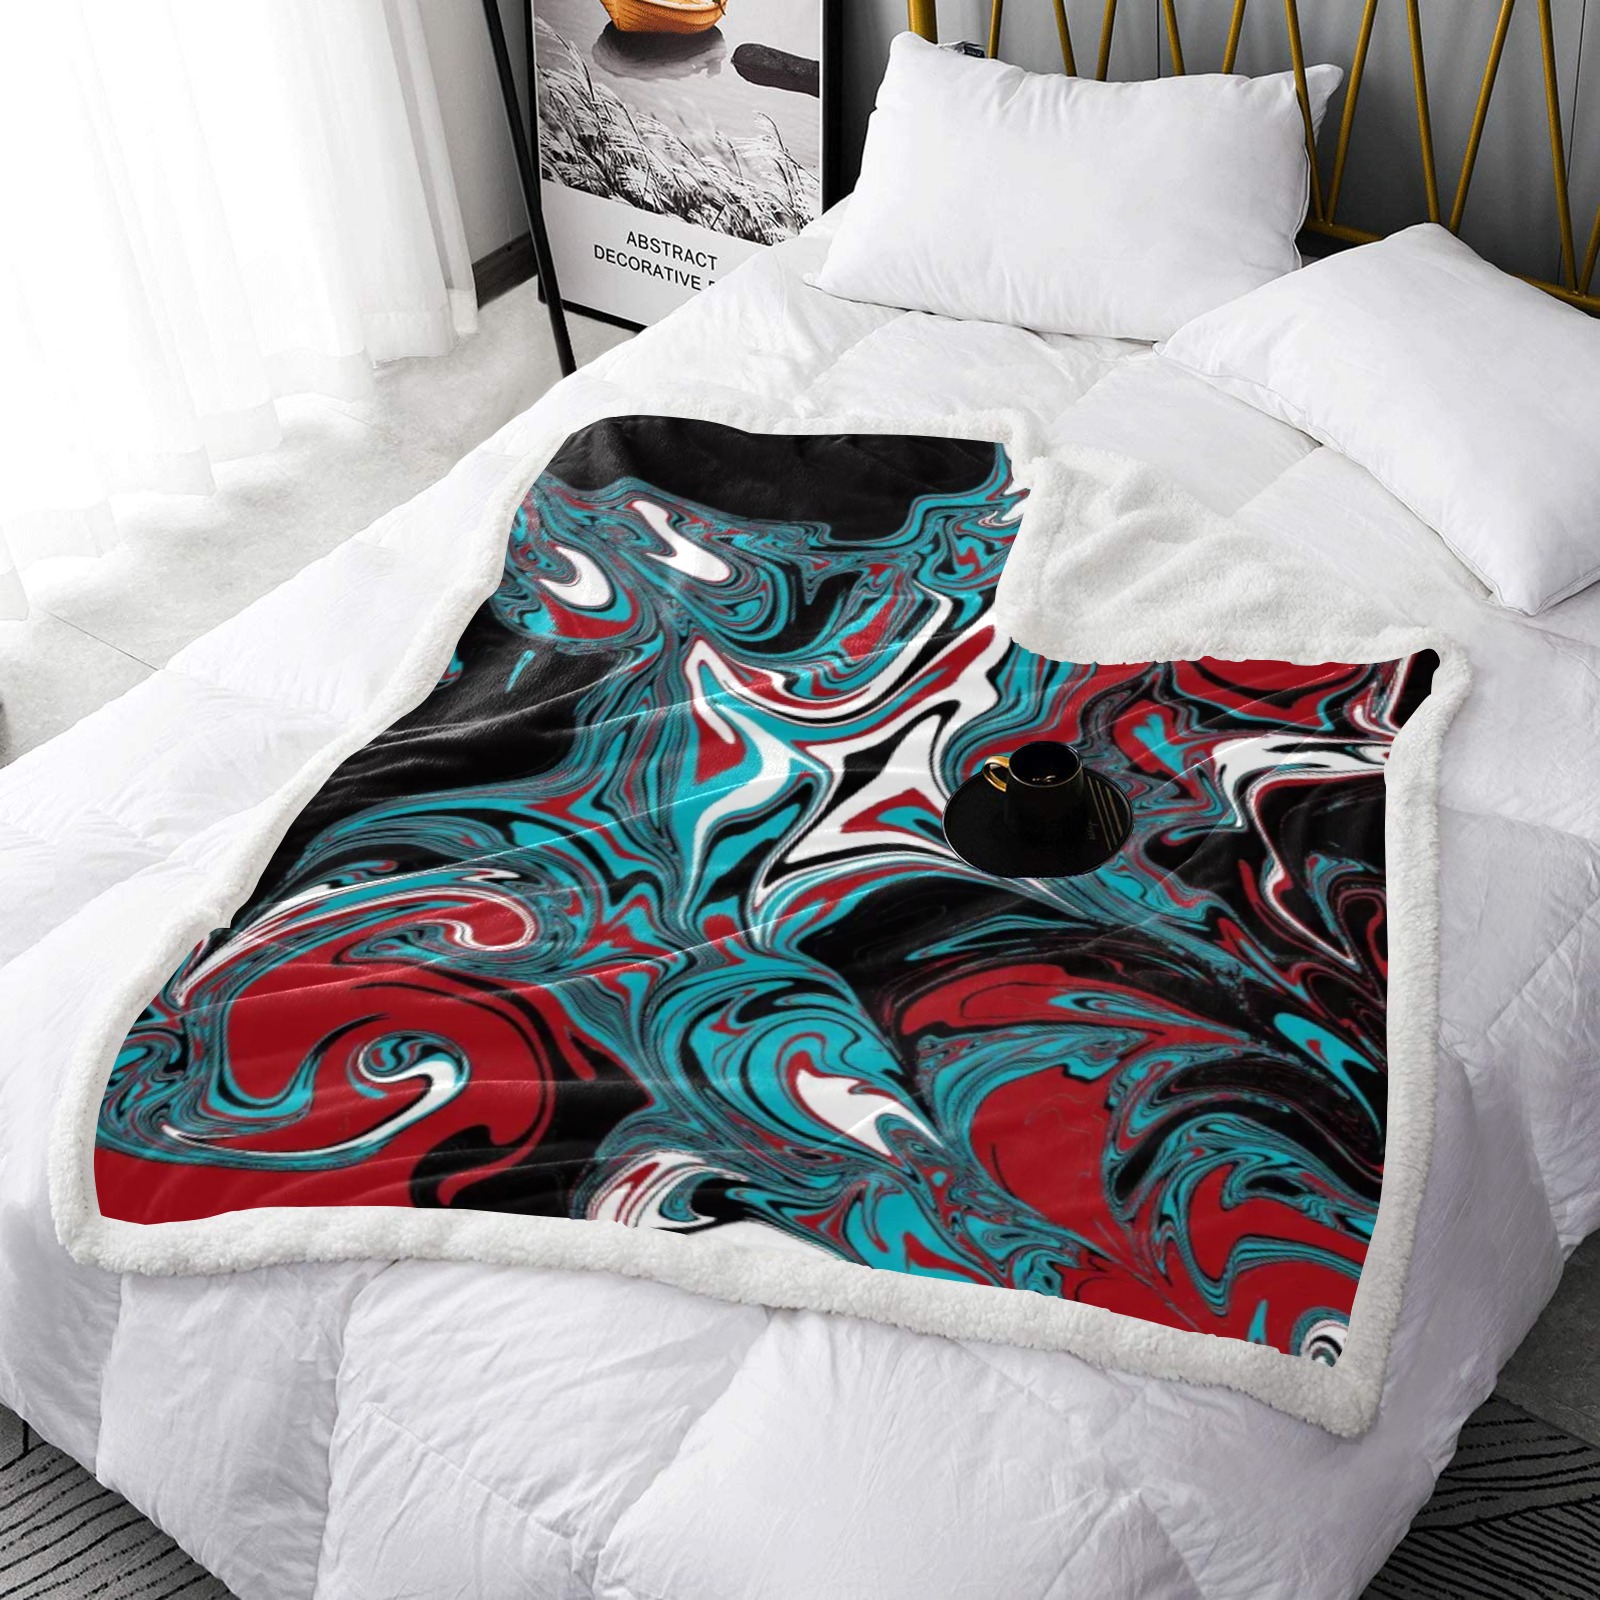 Dark Wave of Colors Double Layer Short Plush Blanket 50"x60"